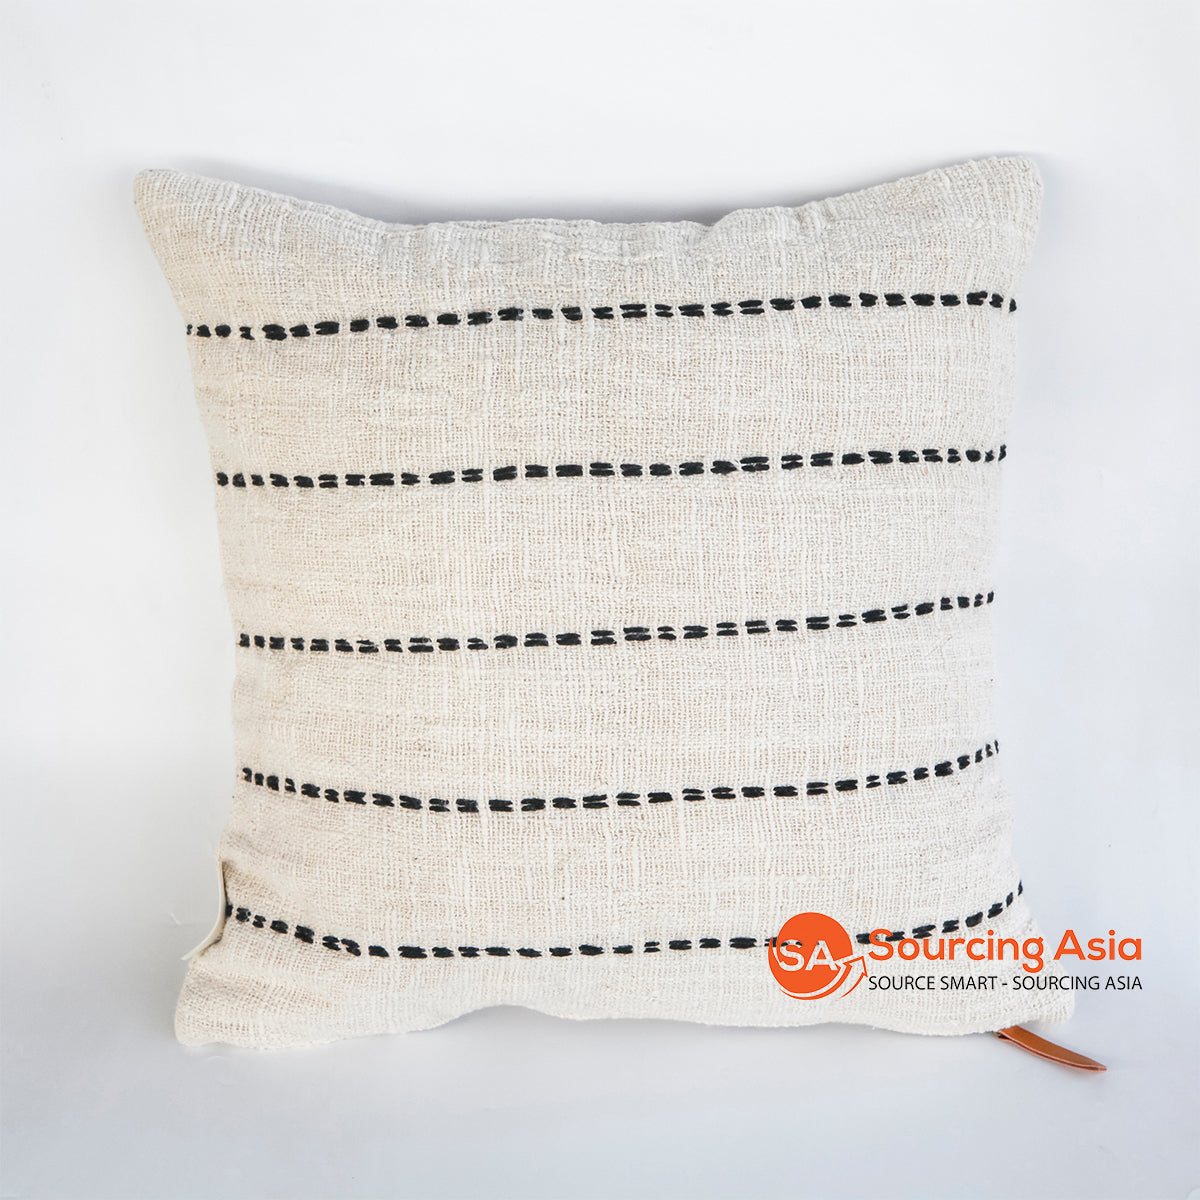 HIP031-4A NATURAL TUMANGGAL SQUARE COVER CUSHION 50X50CM WITH BLACK HAND-STITCHED WITHOUT TASSELS (PRICE WITHOUT INNER)